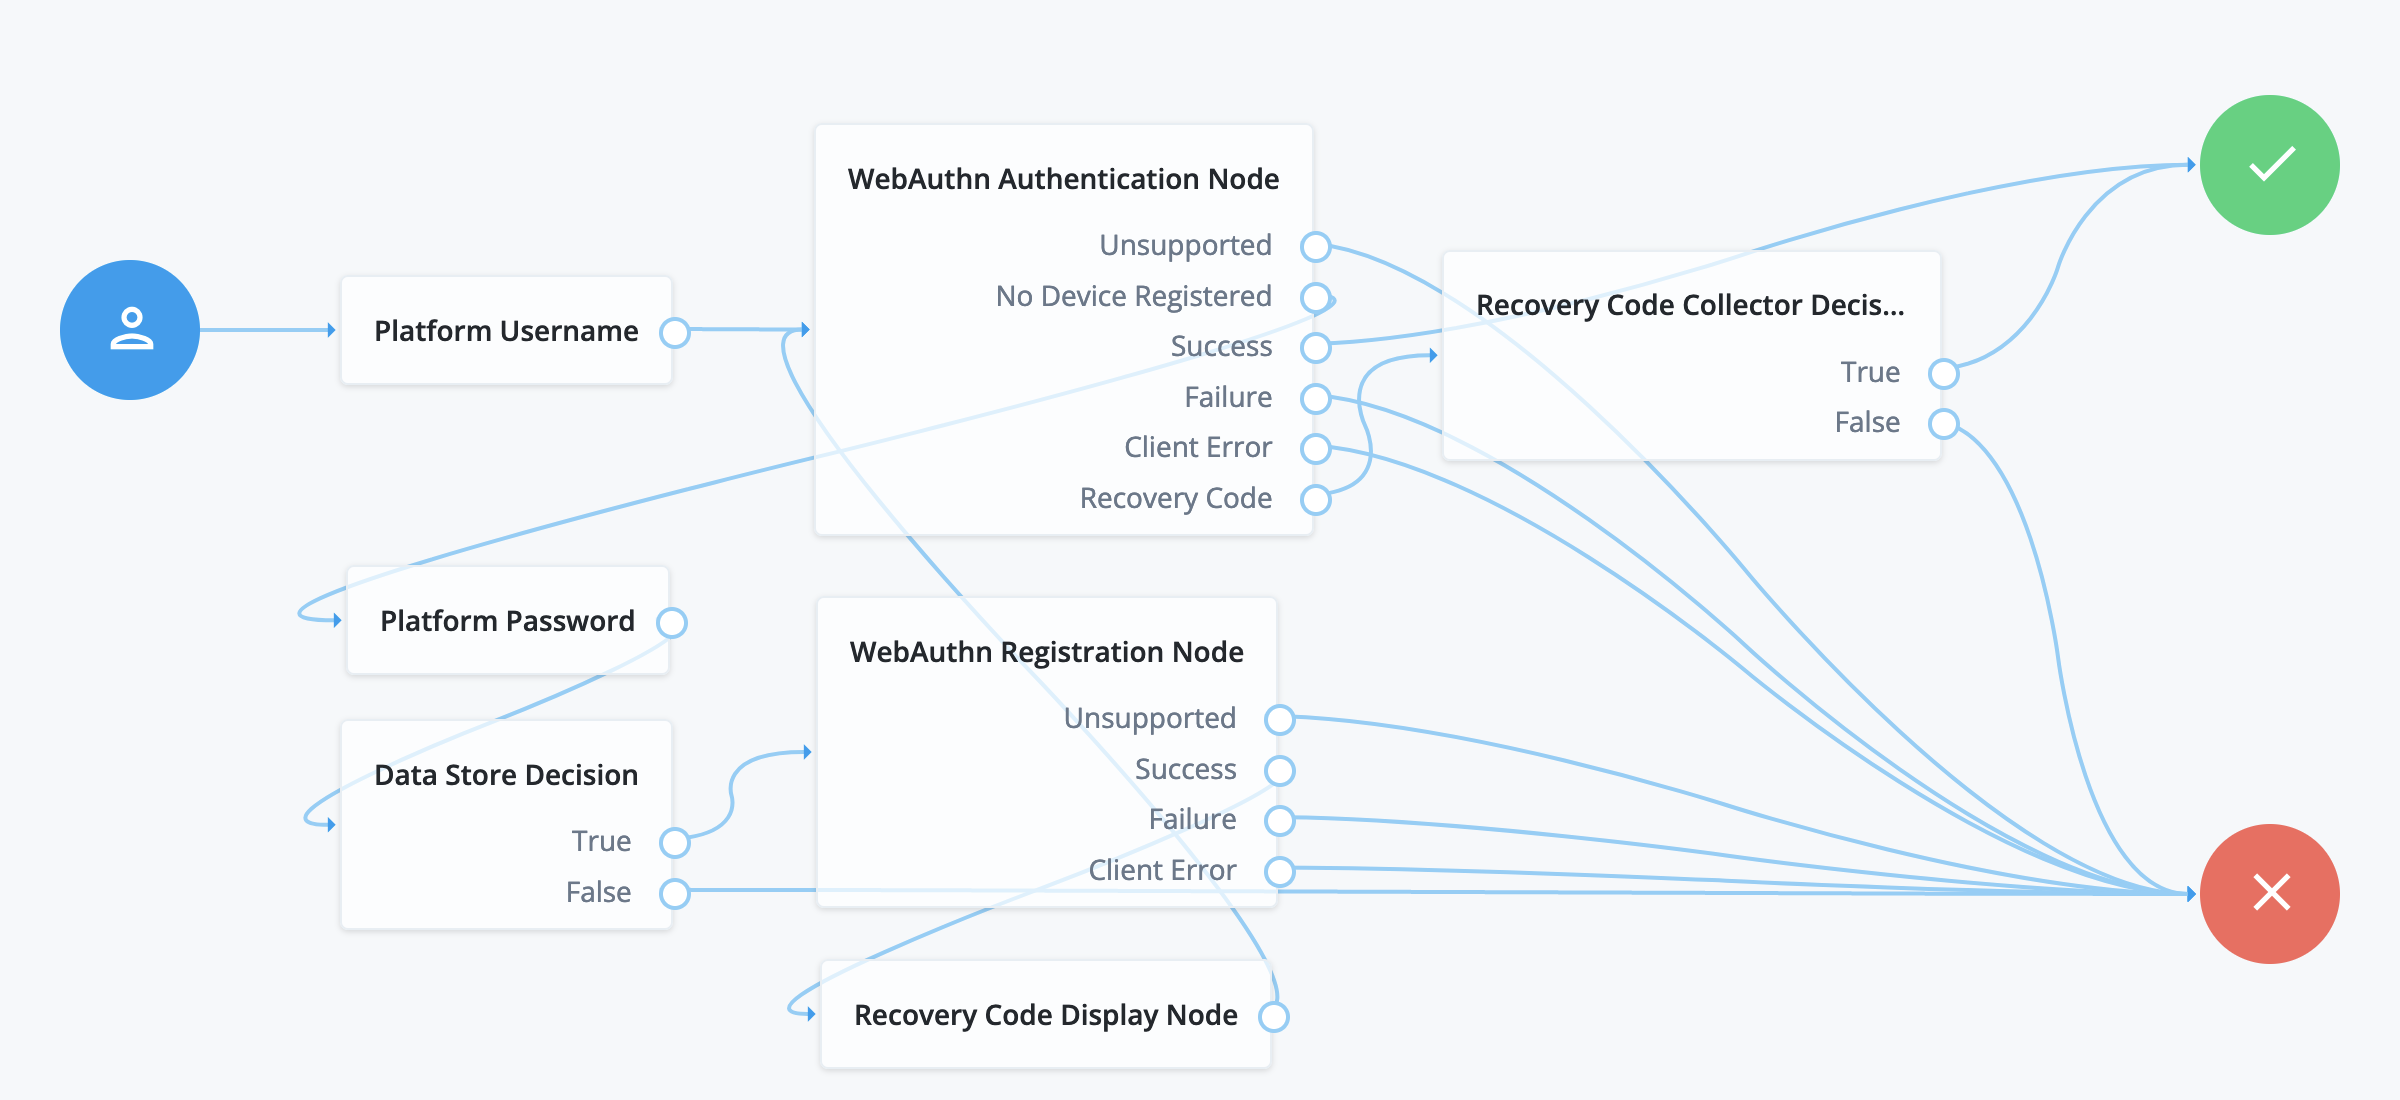 A journey for WebAuthn authentication.